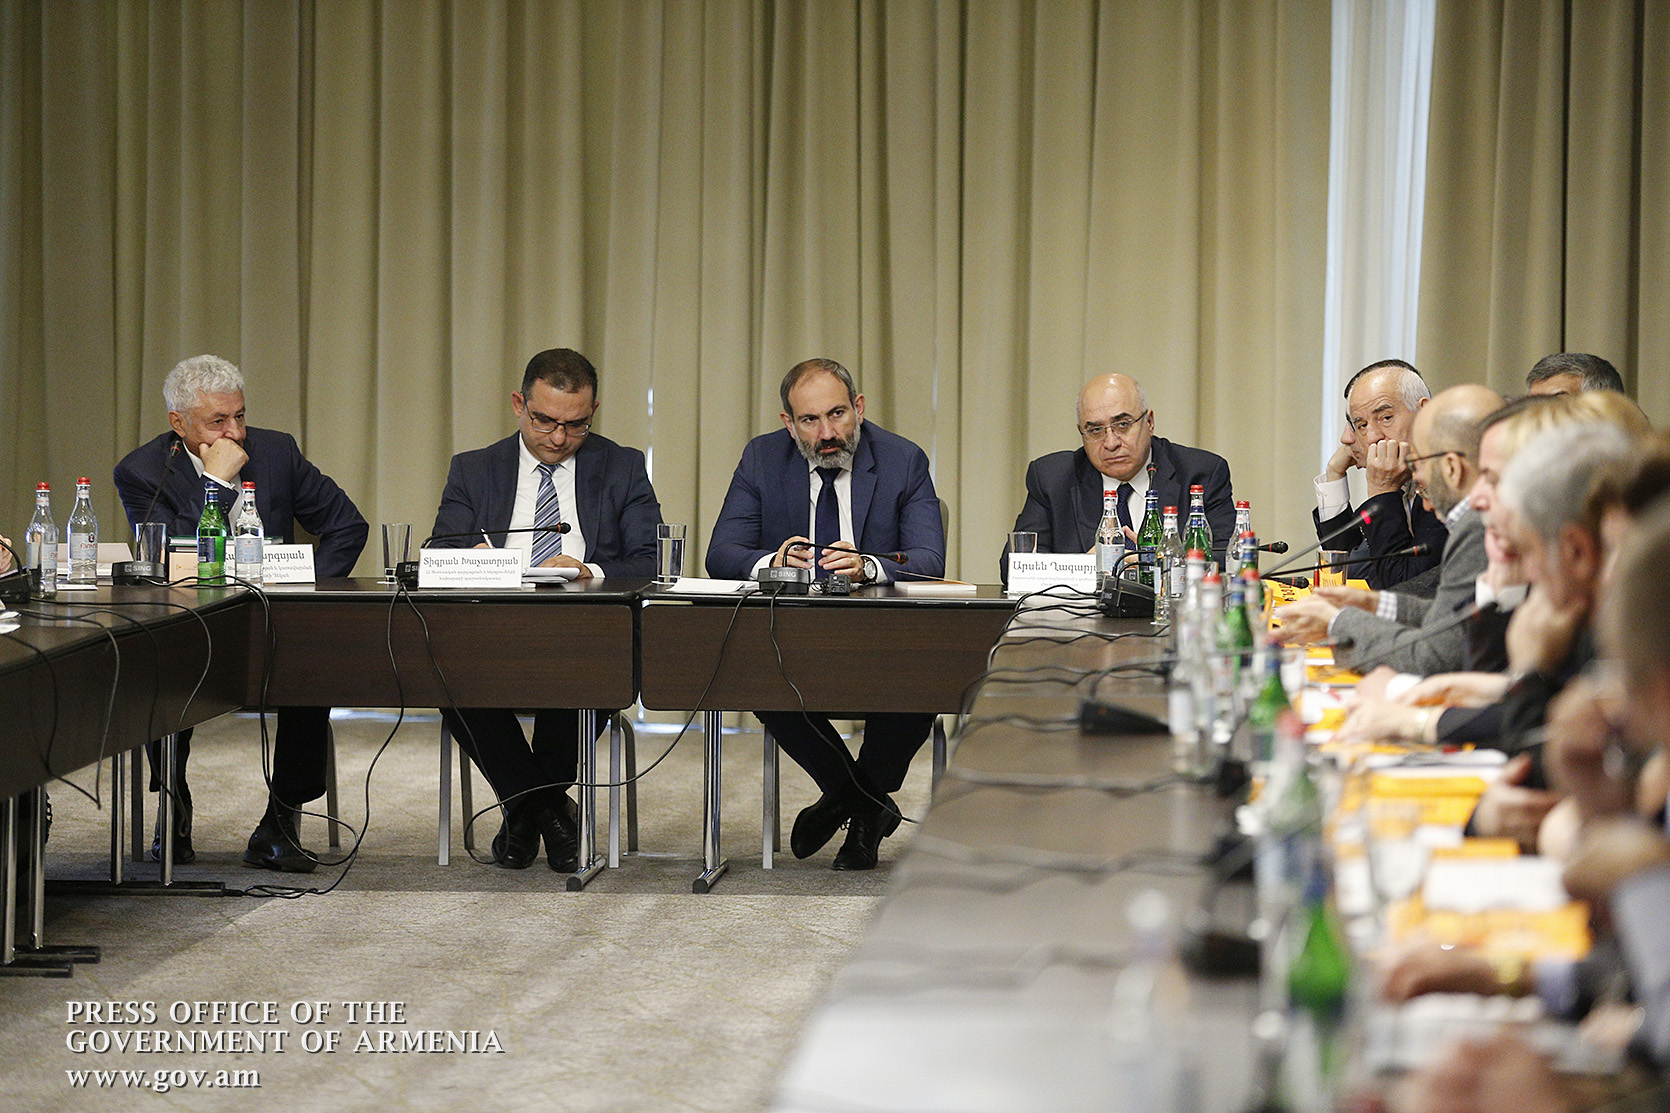 ‘Changing the taxpayer’s behavior and the public perception of businessmen is a top priority that needs to be addressed today’ – Nikol Pashinyan attends conference on Armenia’s economic development